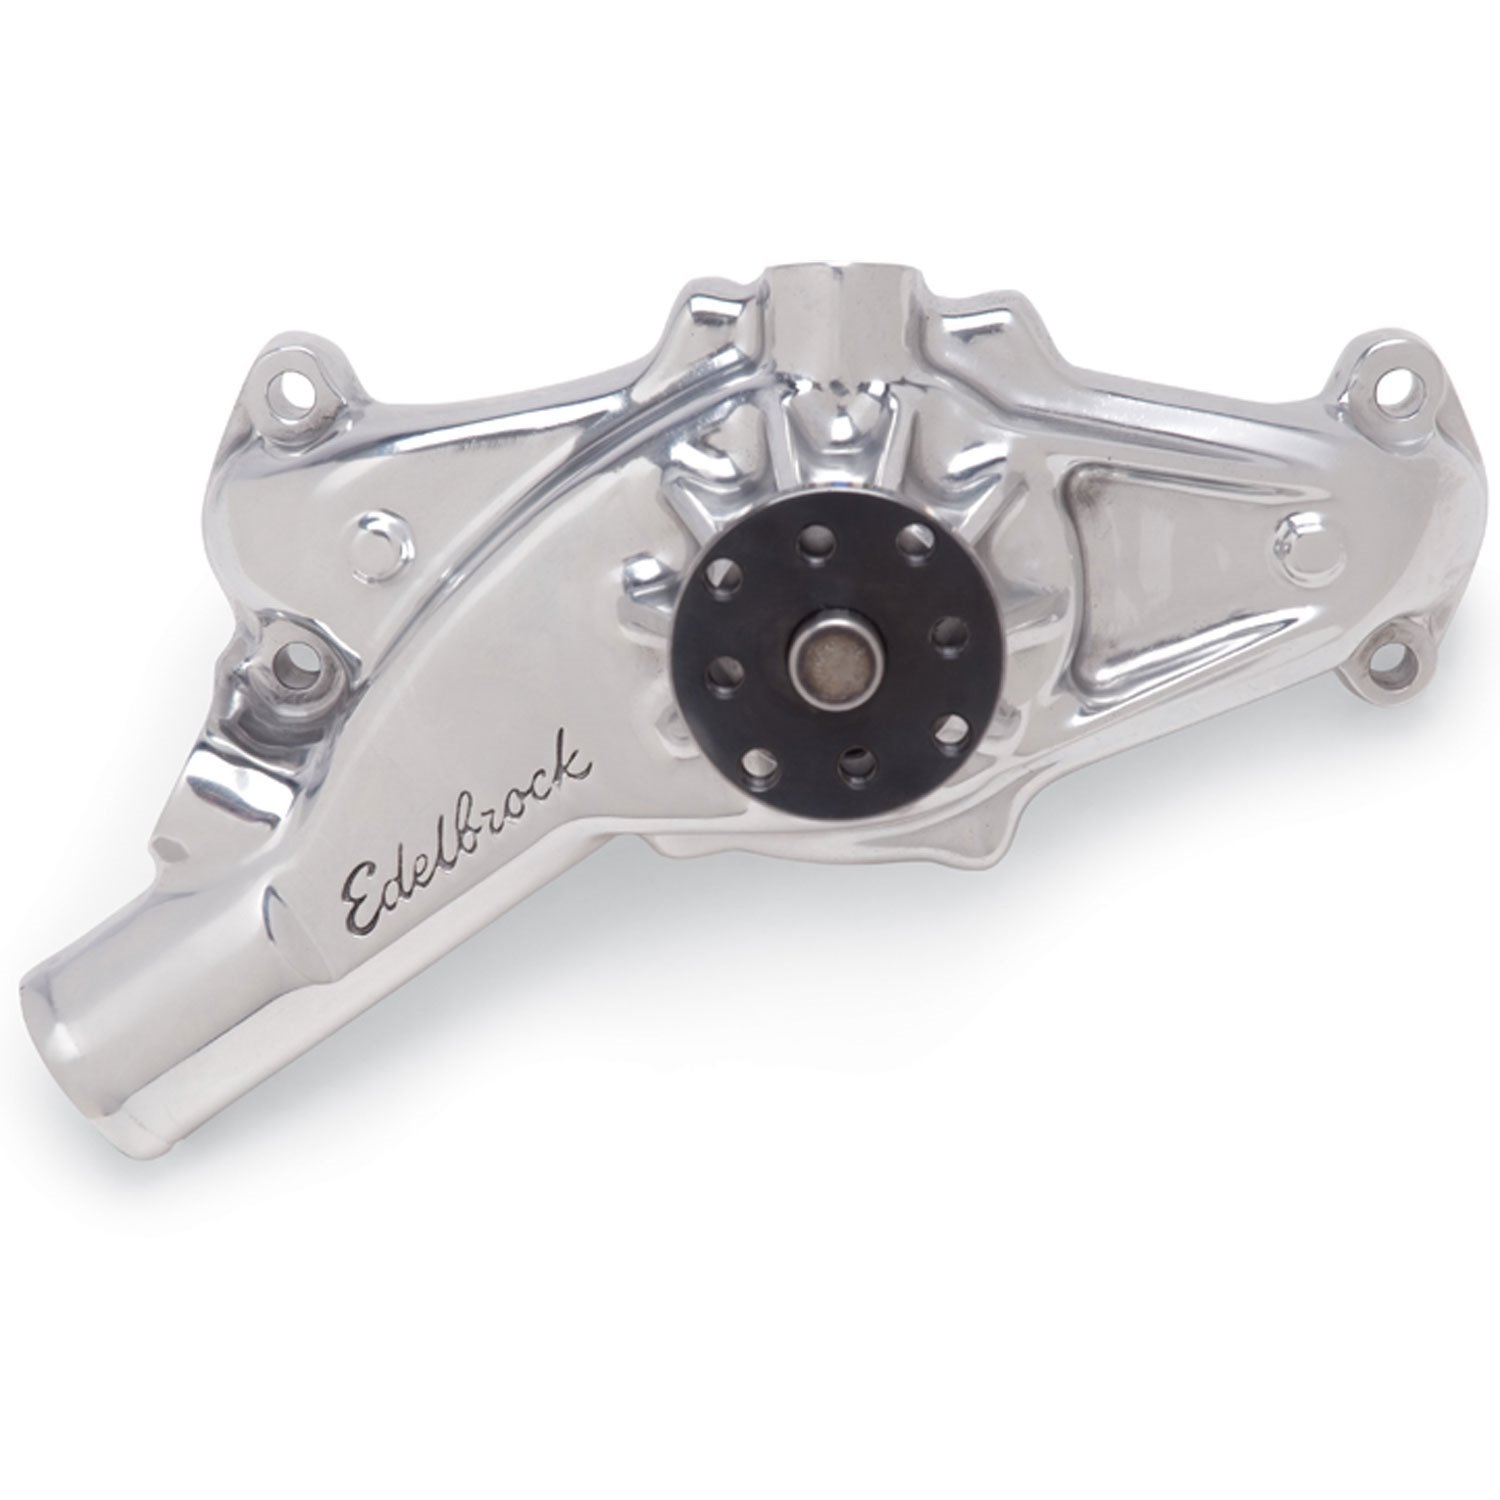 Victor Series Polished  Aluminum Water Pump for 1971-1974 Big Block Chevy Corvette